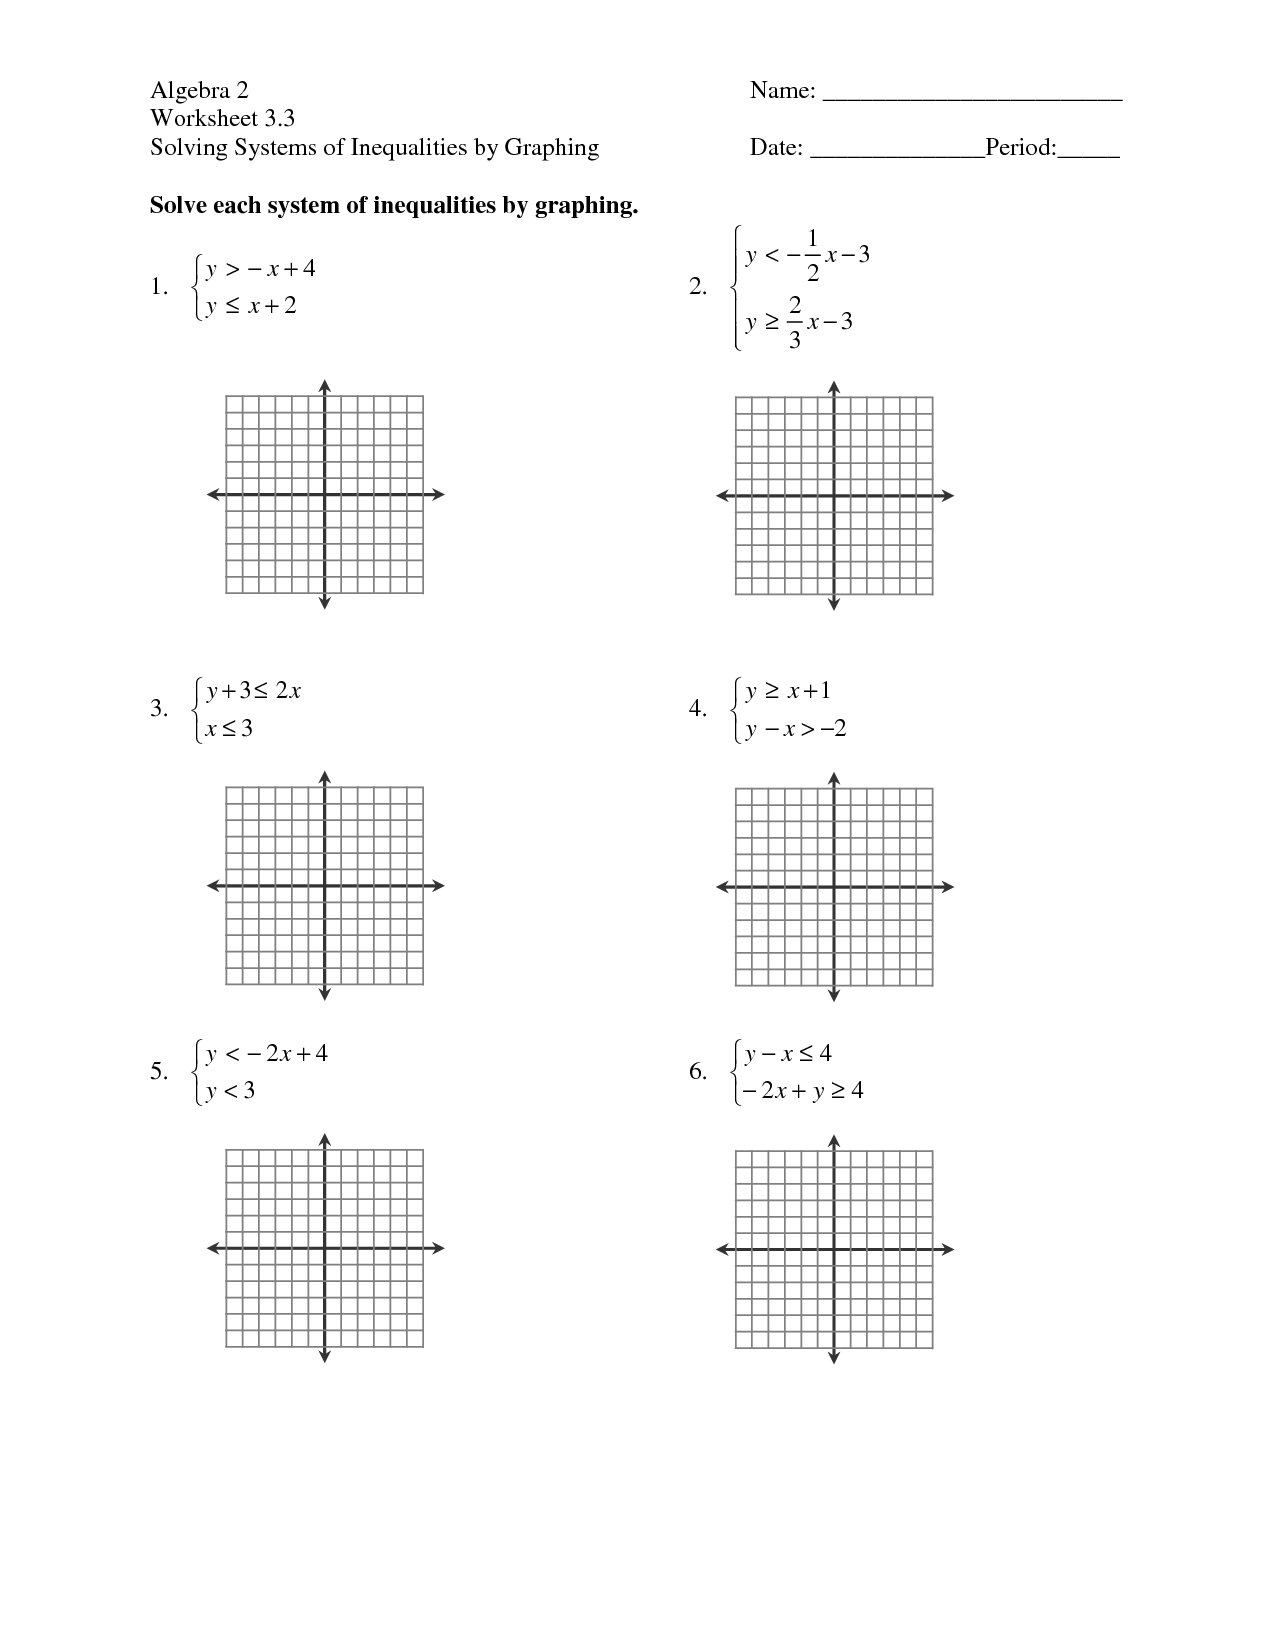 Algebra 2 Worksheet 3 3 Solving Systems Of Inequalities By Graphing  1000 ideas about systems 